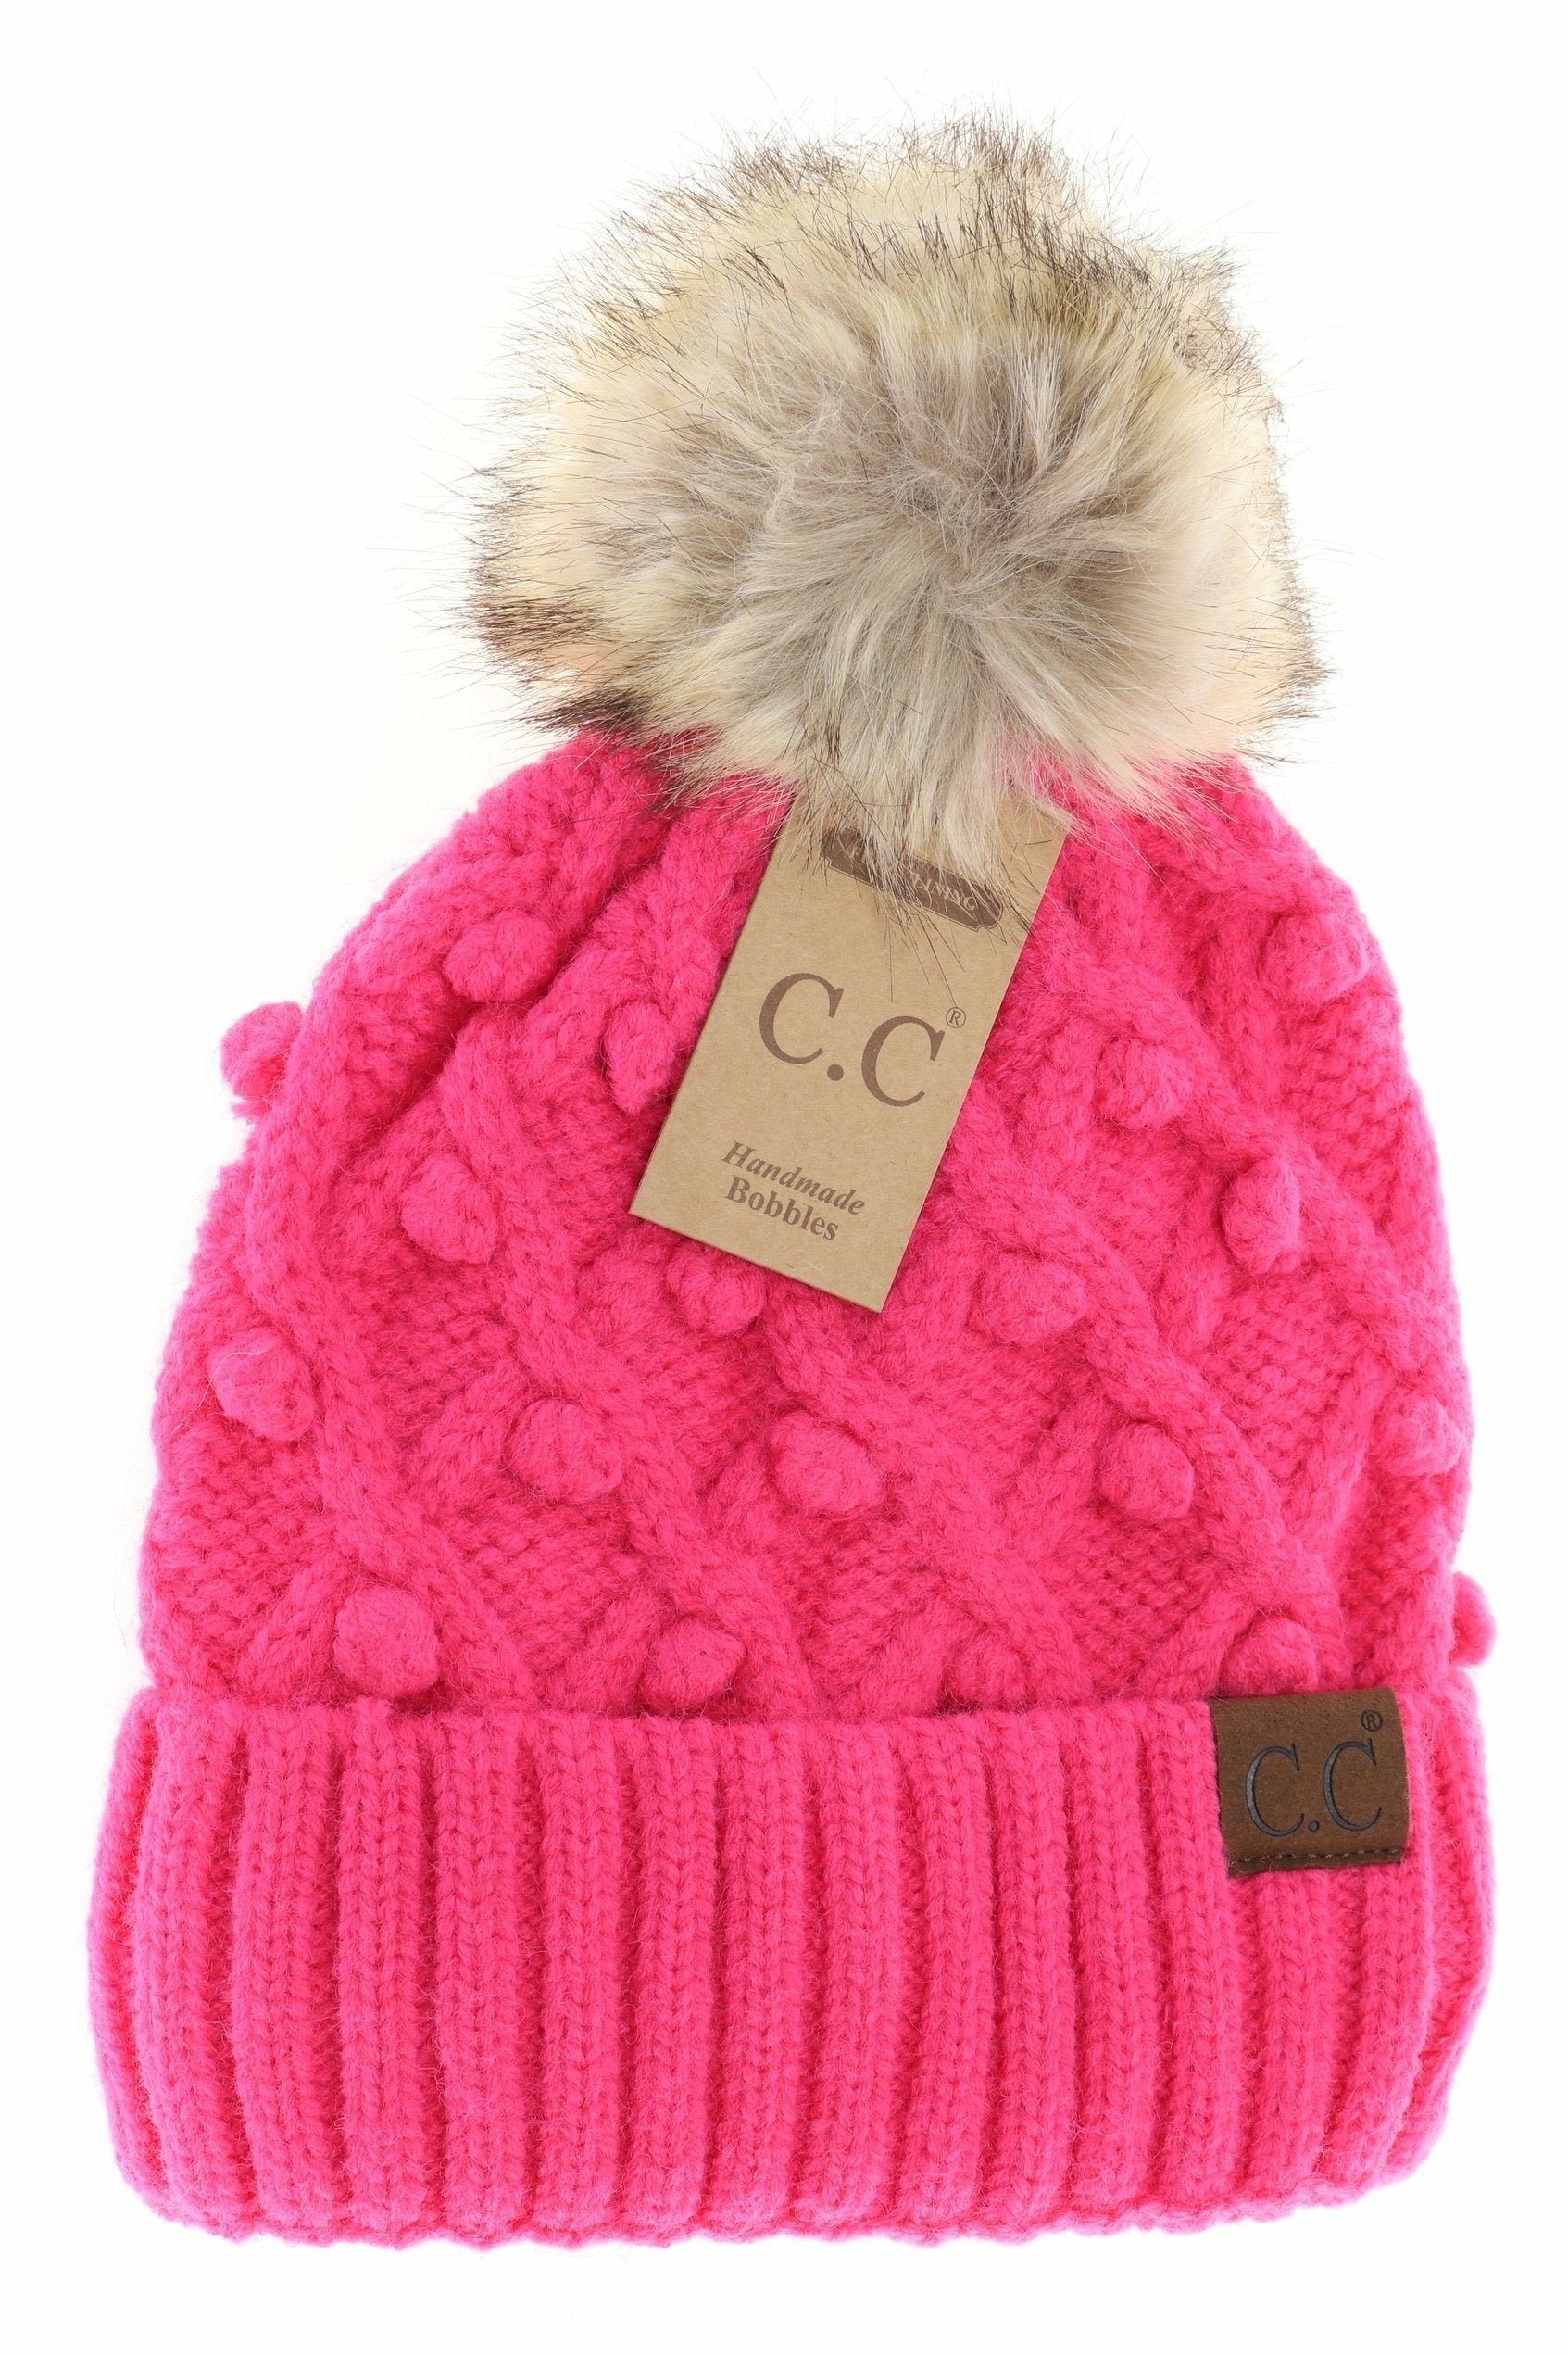 Bobble Knit Fur Pom Beanie Candy Pink Candy Pink  beanie CC Brand Beanies- Tilden Co.